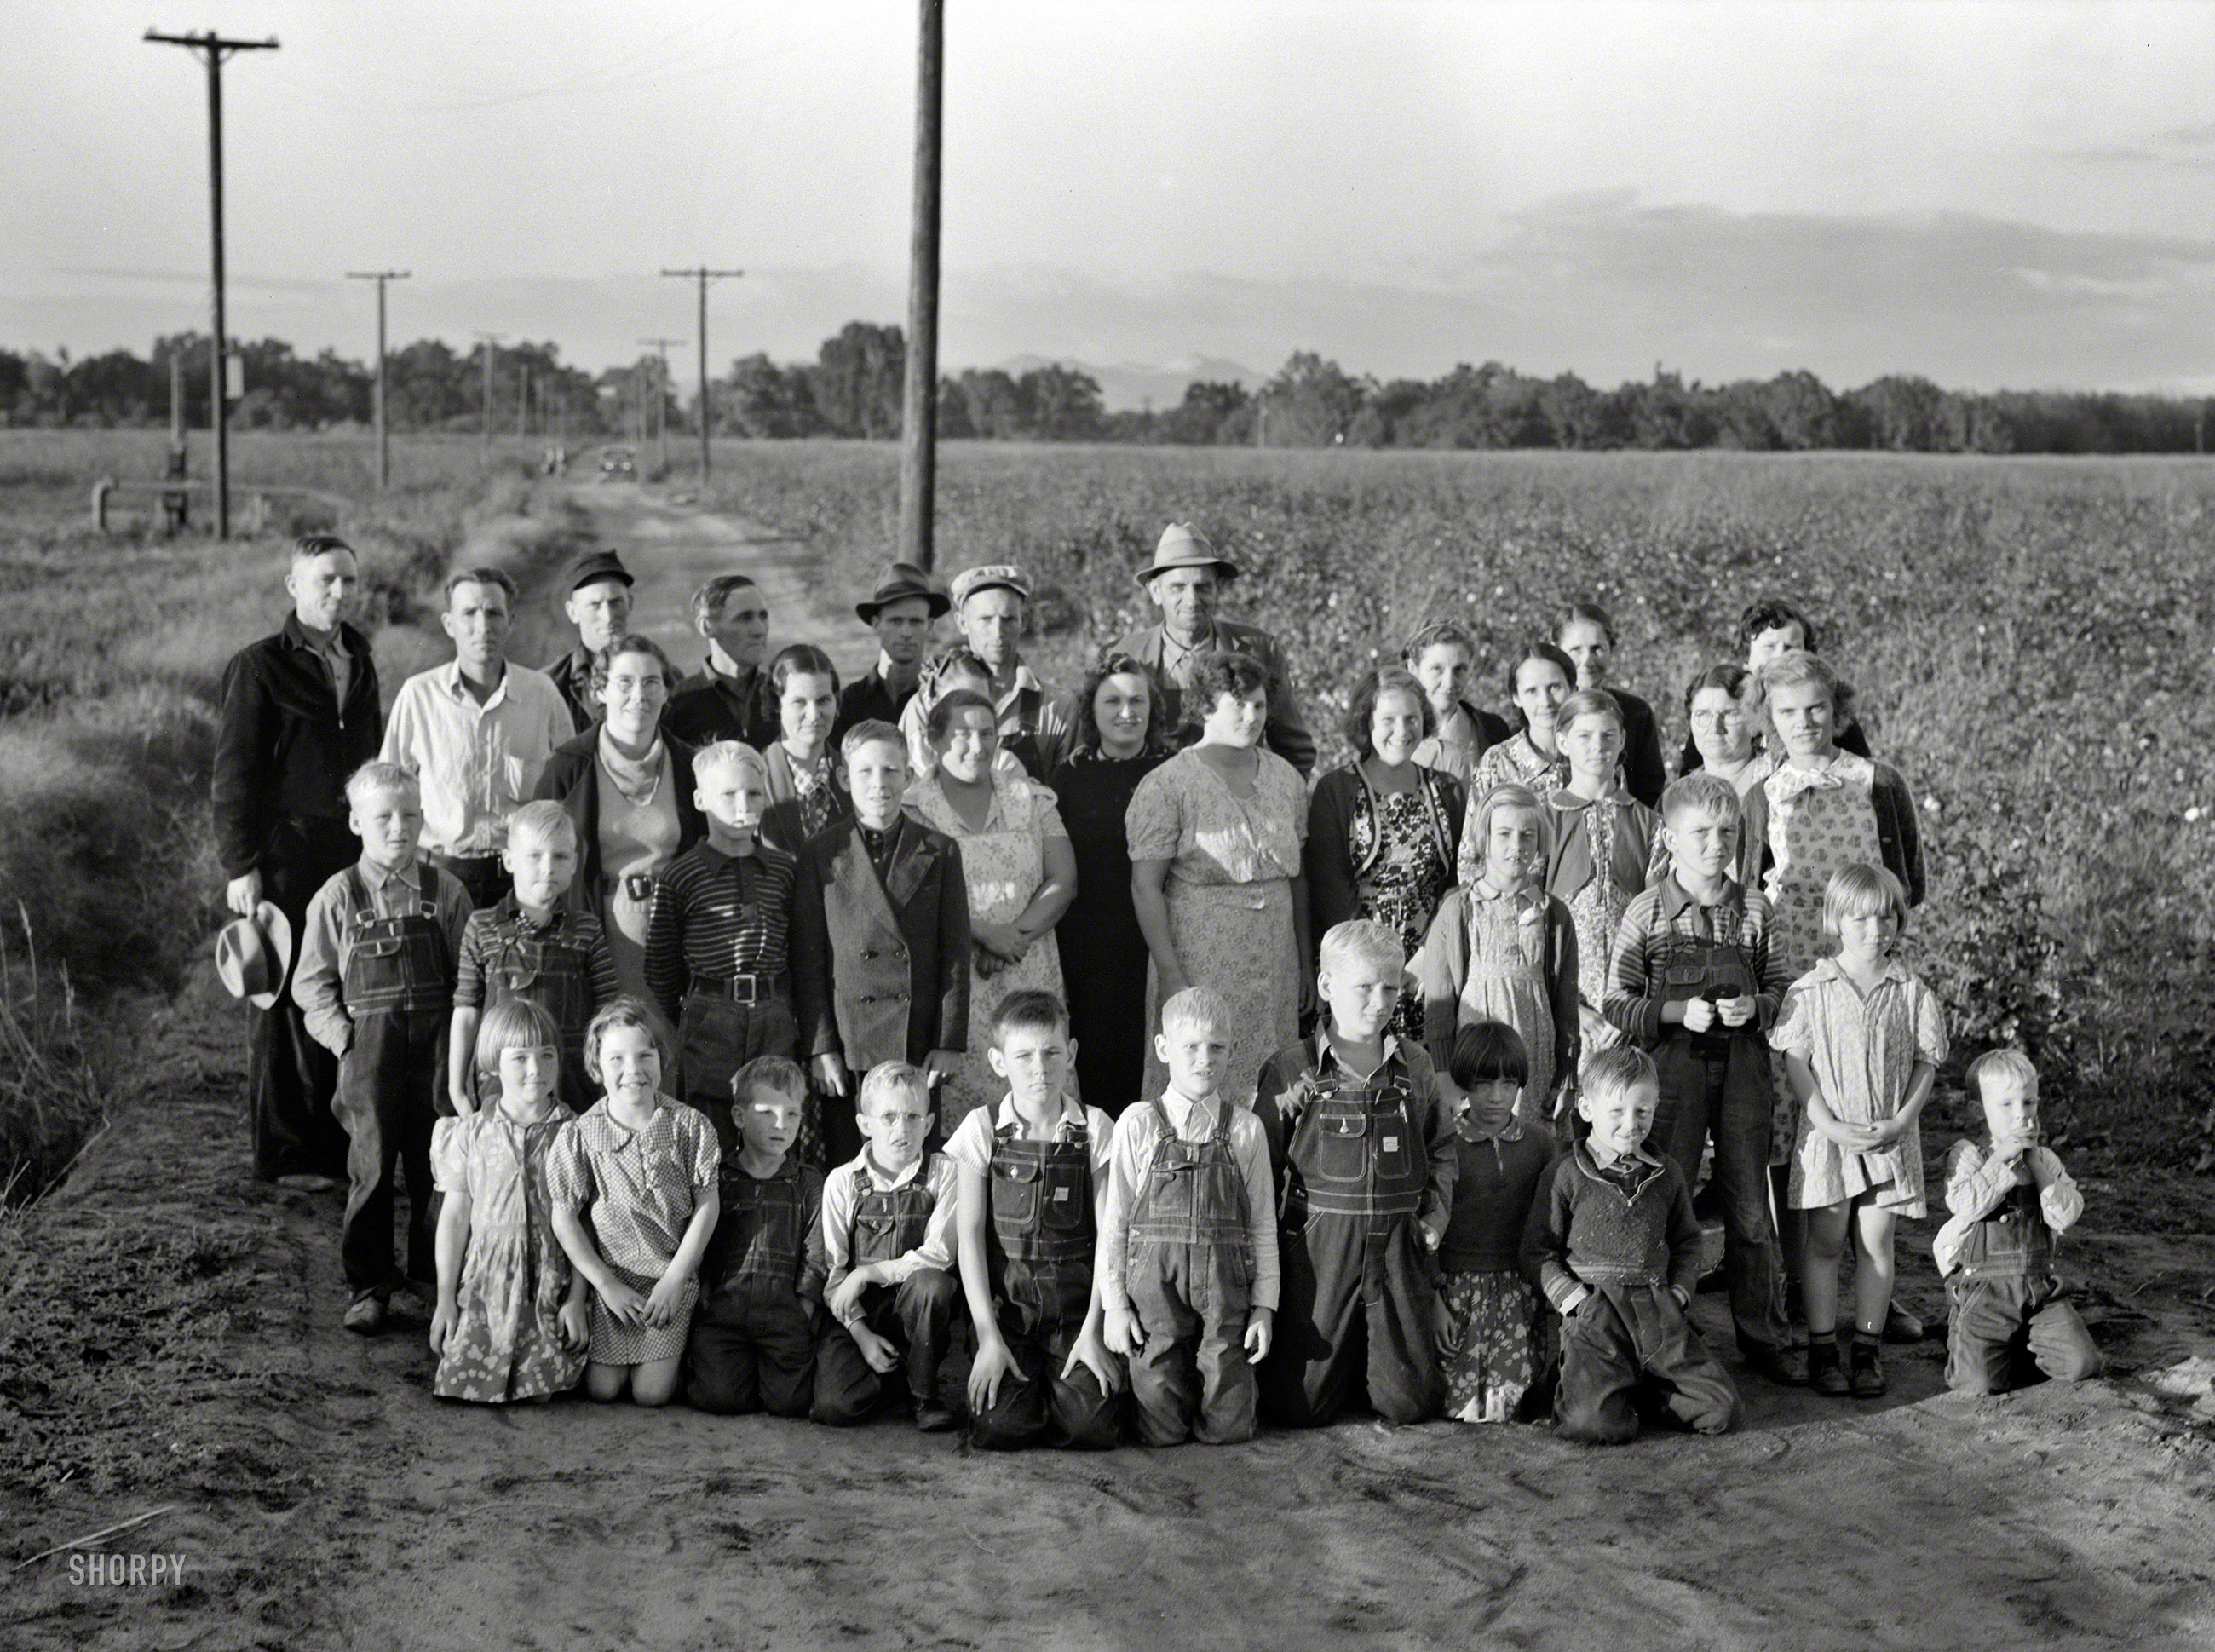 November 1938. "Visalia (vicinity), Tulare County, California. Miners' cooperative farm. Ten families have been established on the old ranch of 500 acres, which they operate as a farm unit, raising cotton, alfalfa and dairy products for cash crops." Photo by Dorothea Lange for the Farm Security Administration. View full size.